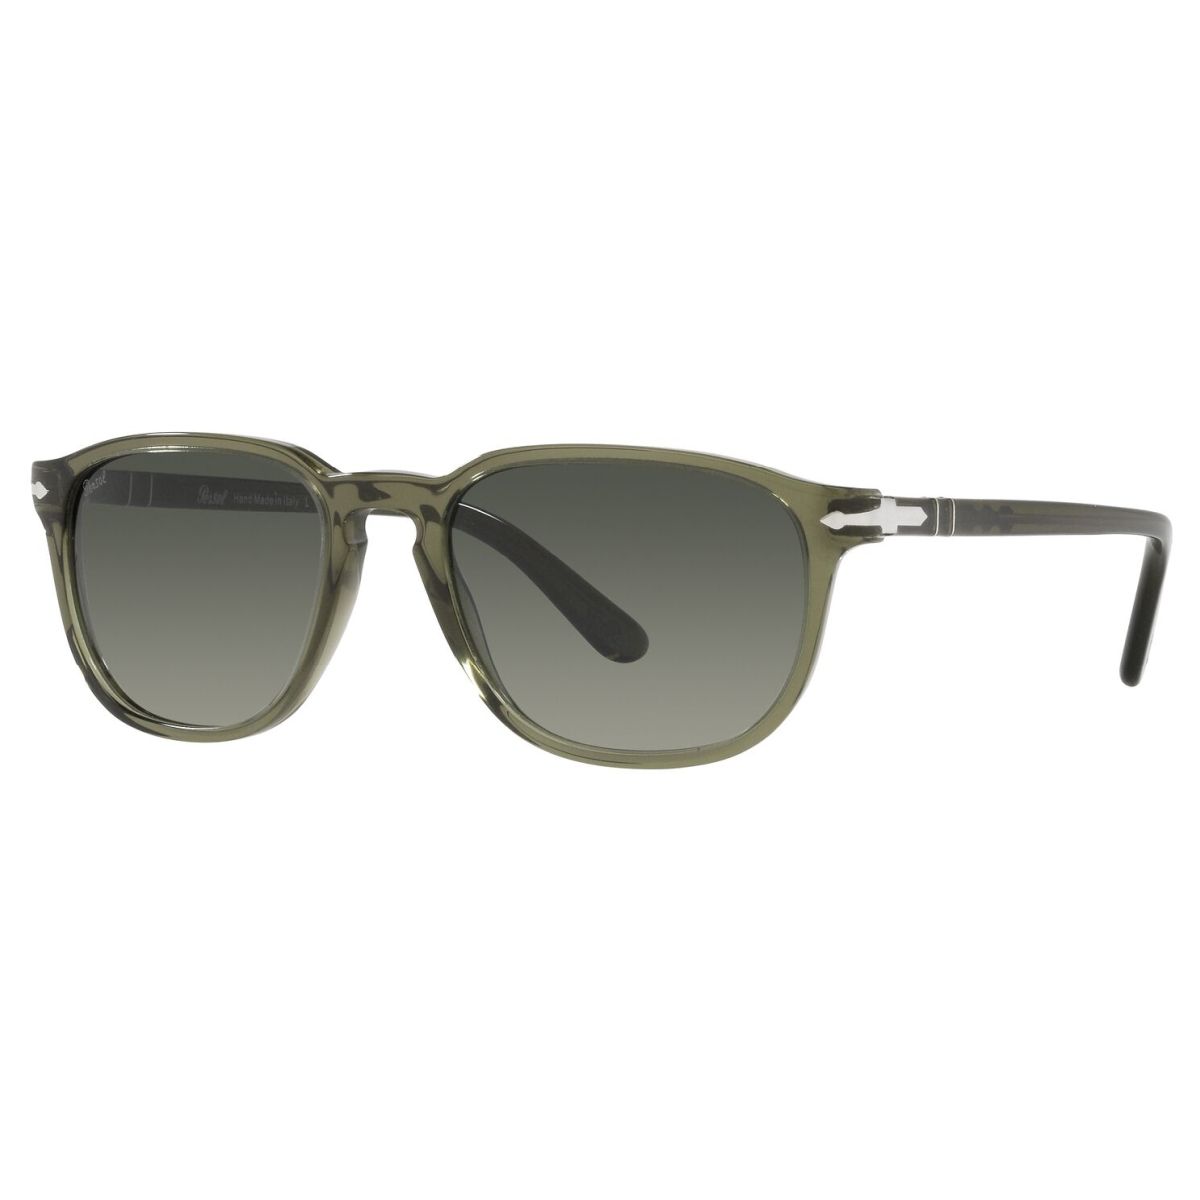 PERSOL 3019S/114271/52